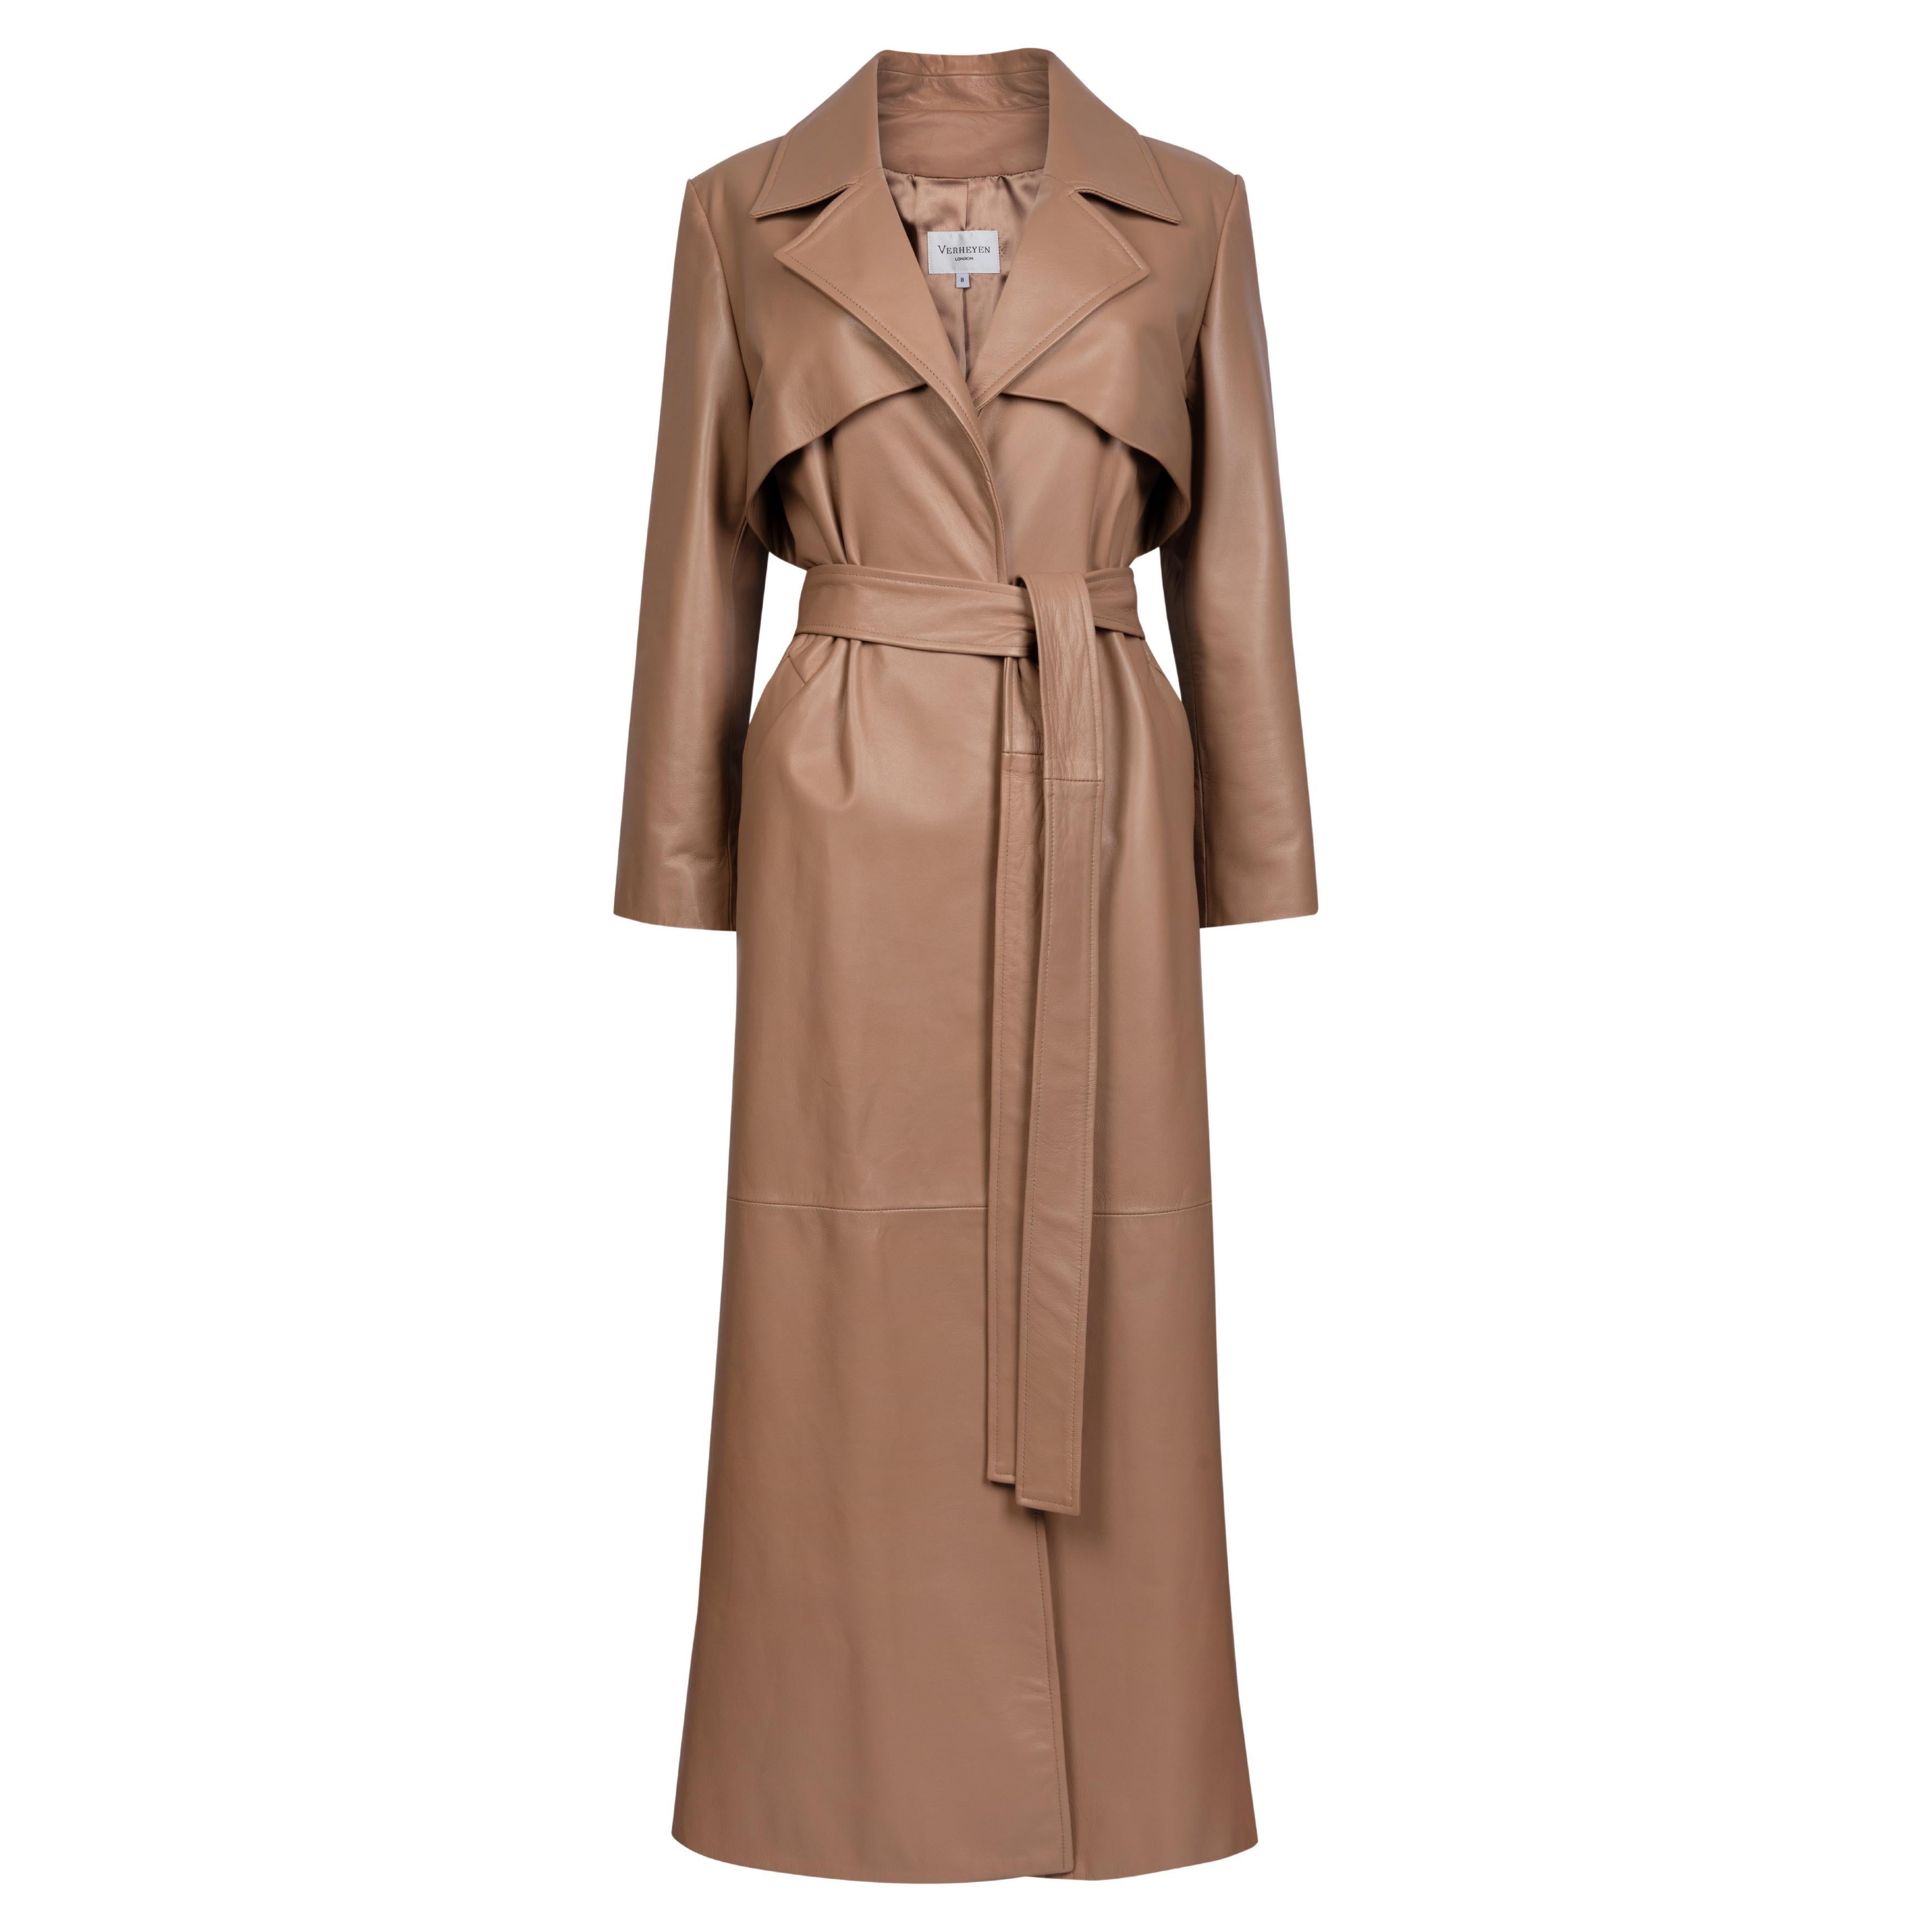 Verheyen London Leather Trench Coat in Taupe Brown - Size uk 10 For Sale